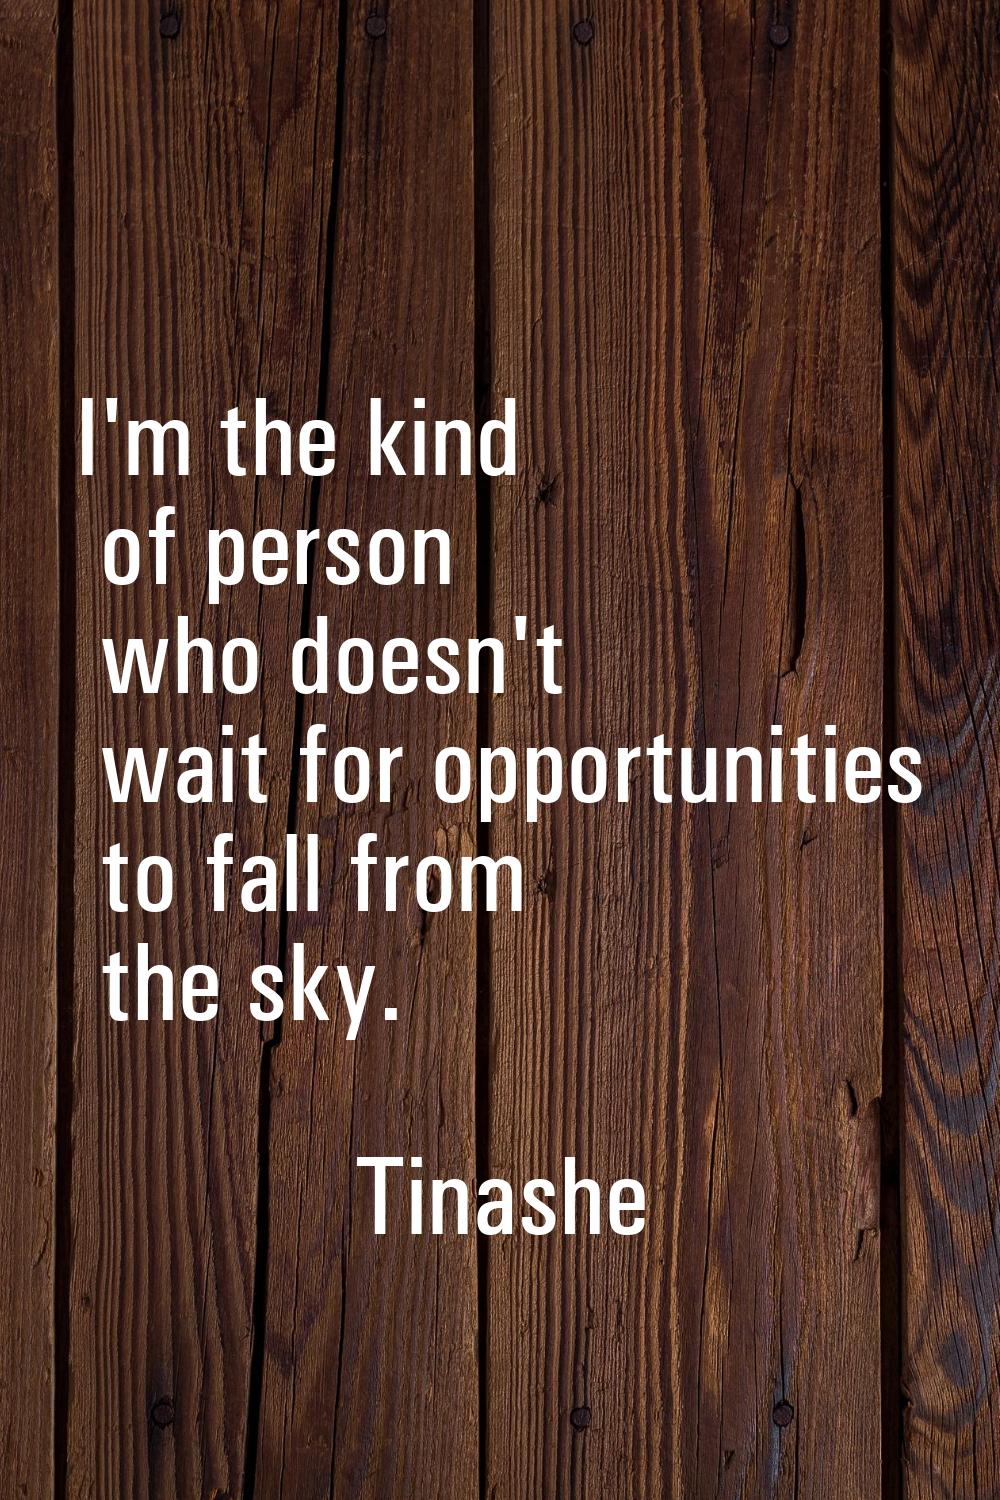 I'm the kind of person who doesn't wait for opportunities to fall from the sky.